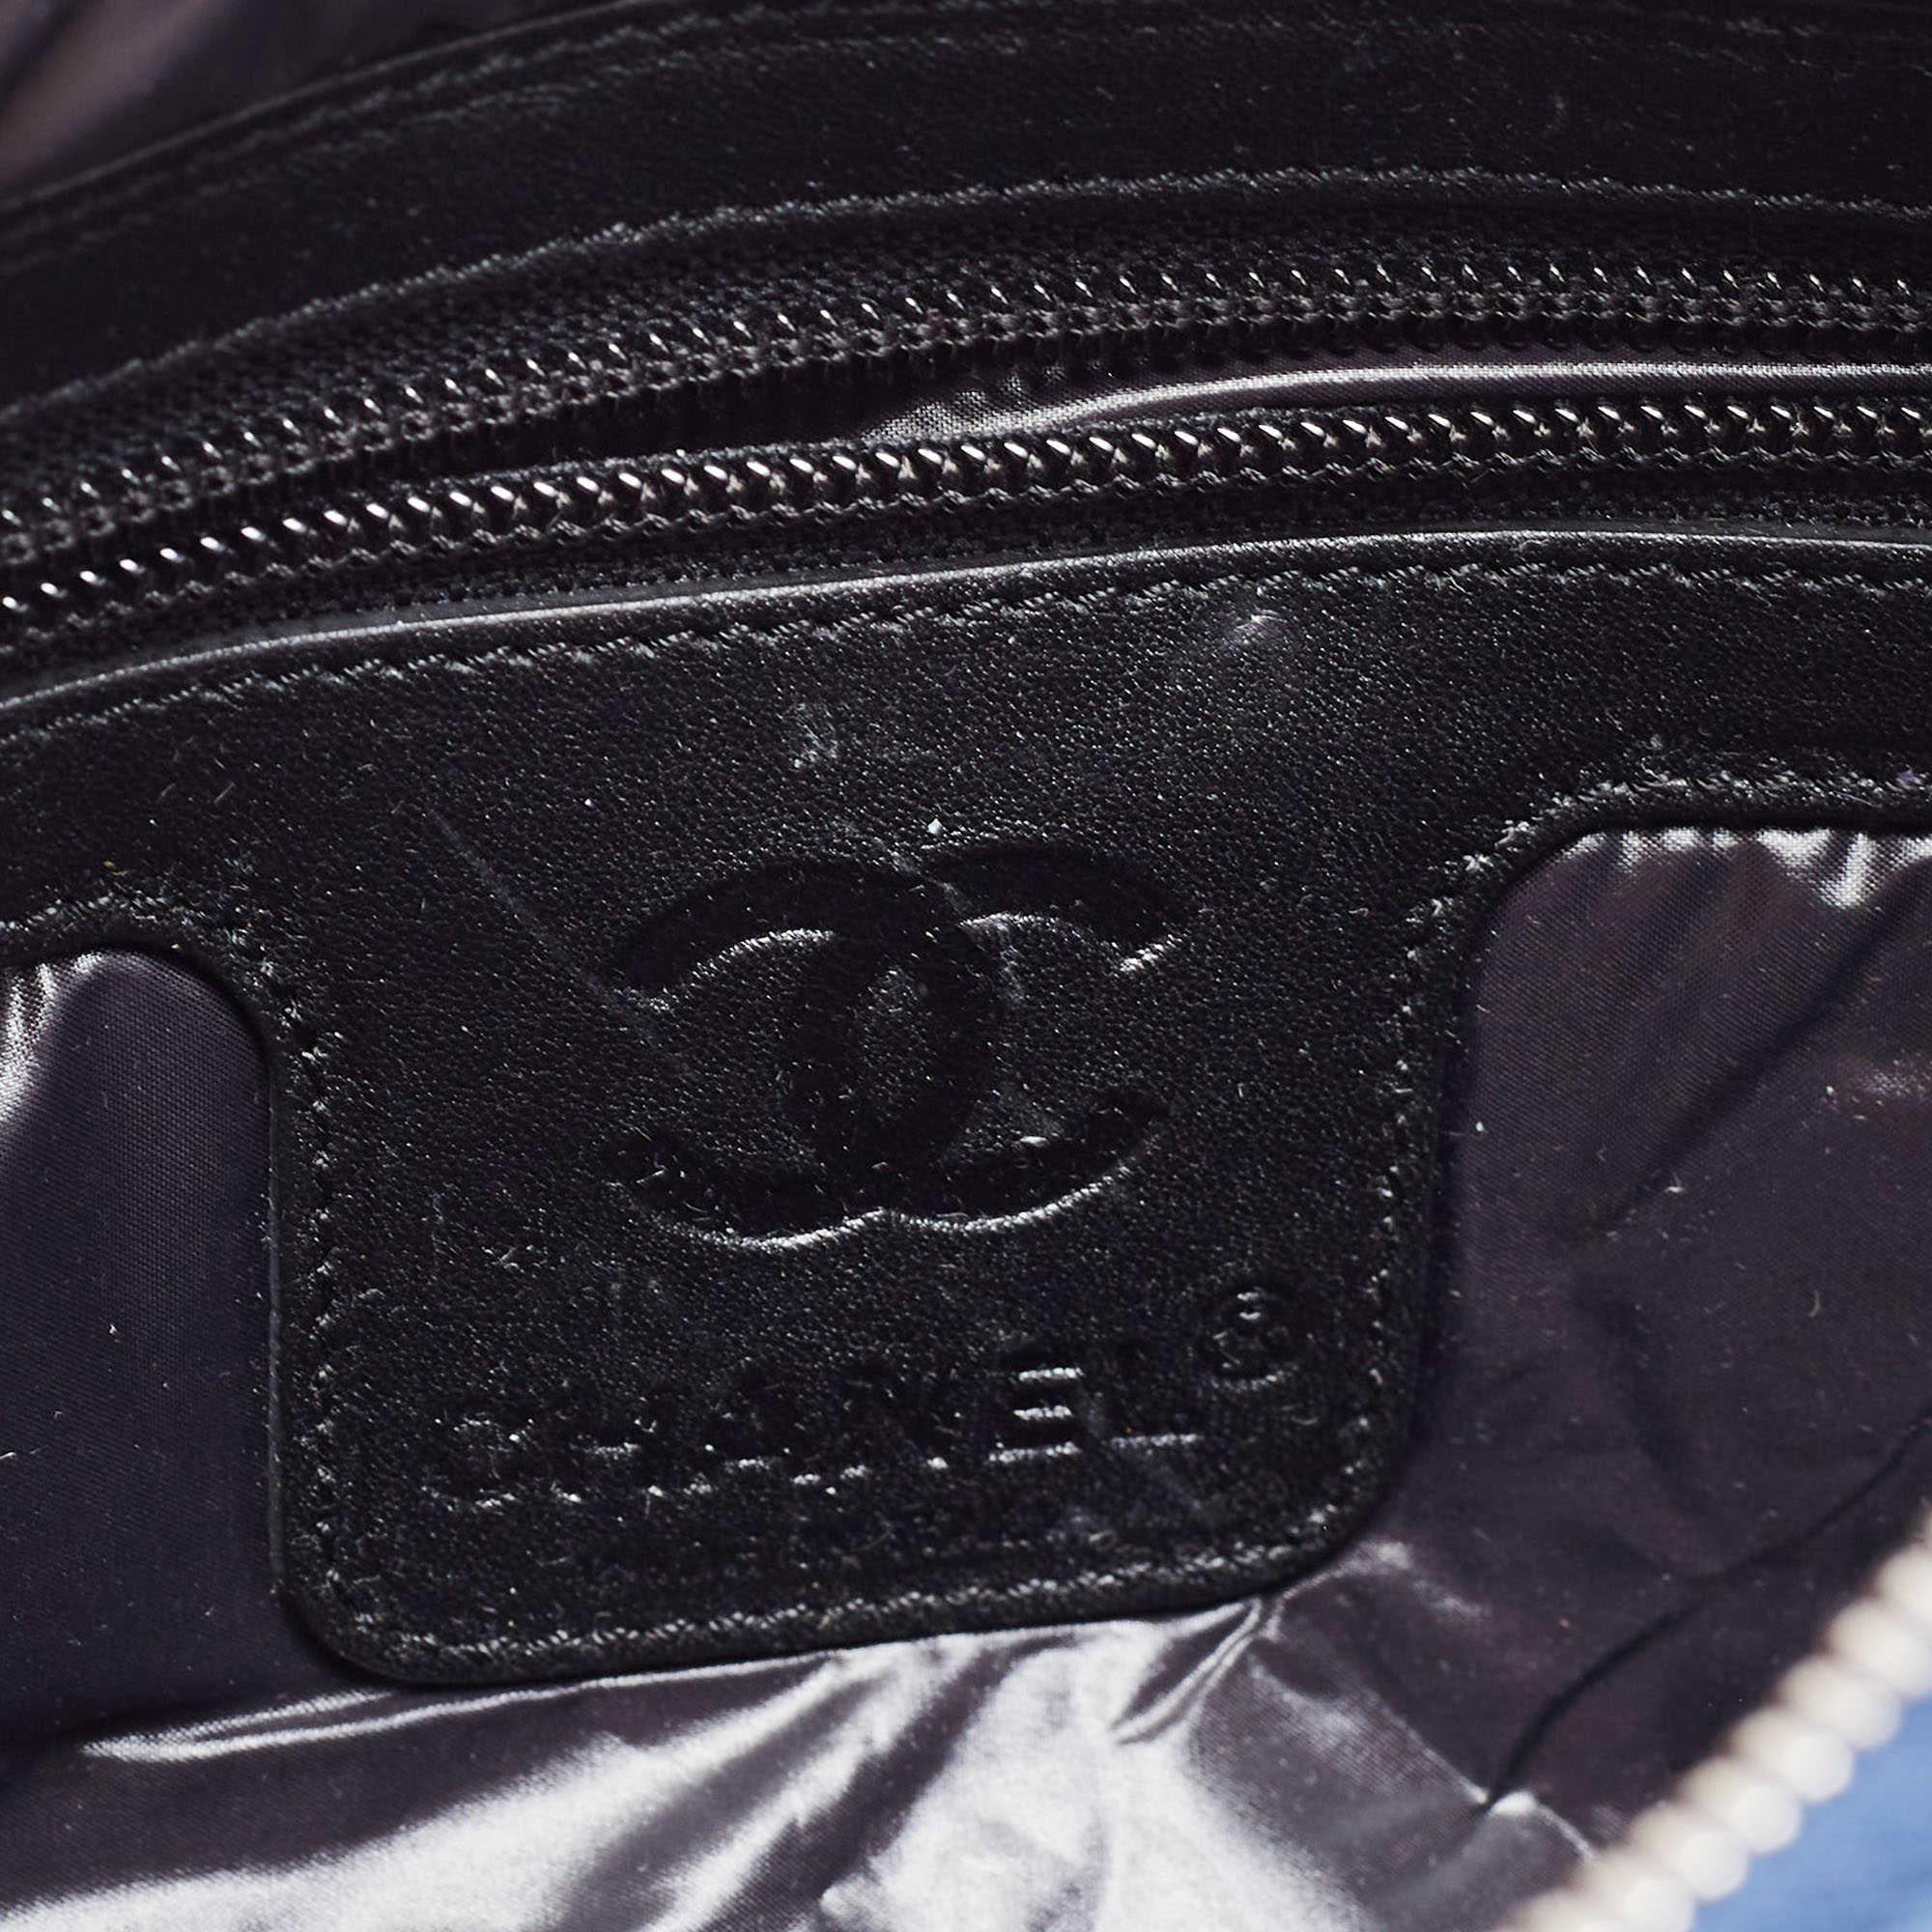 Chanel Blue Quilted Nylon Small Coco Cocoon Messenger Bag